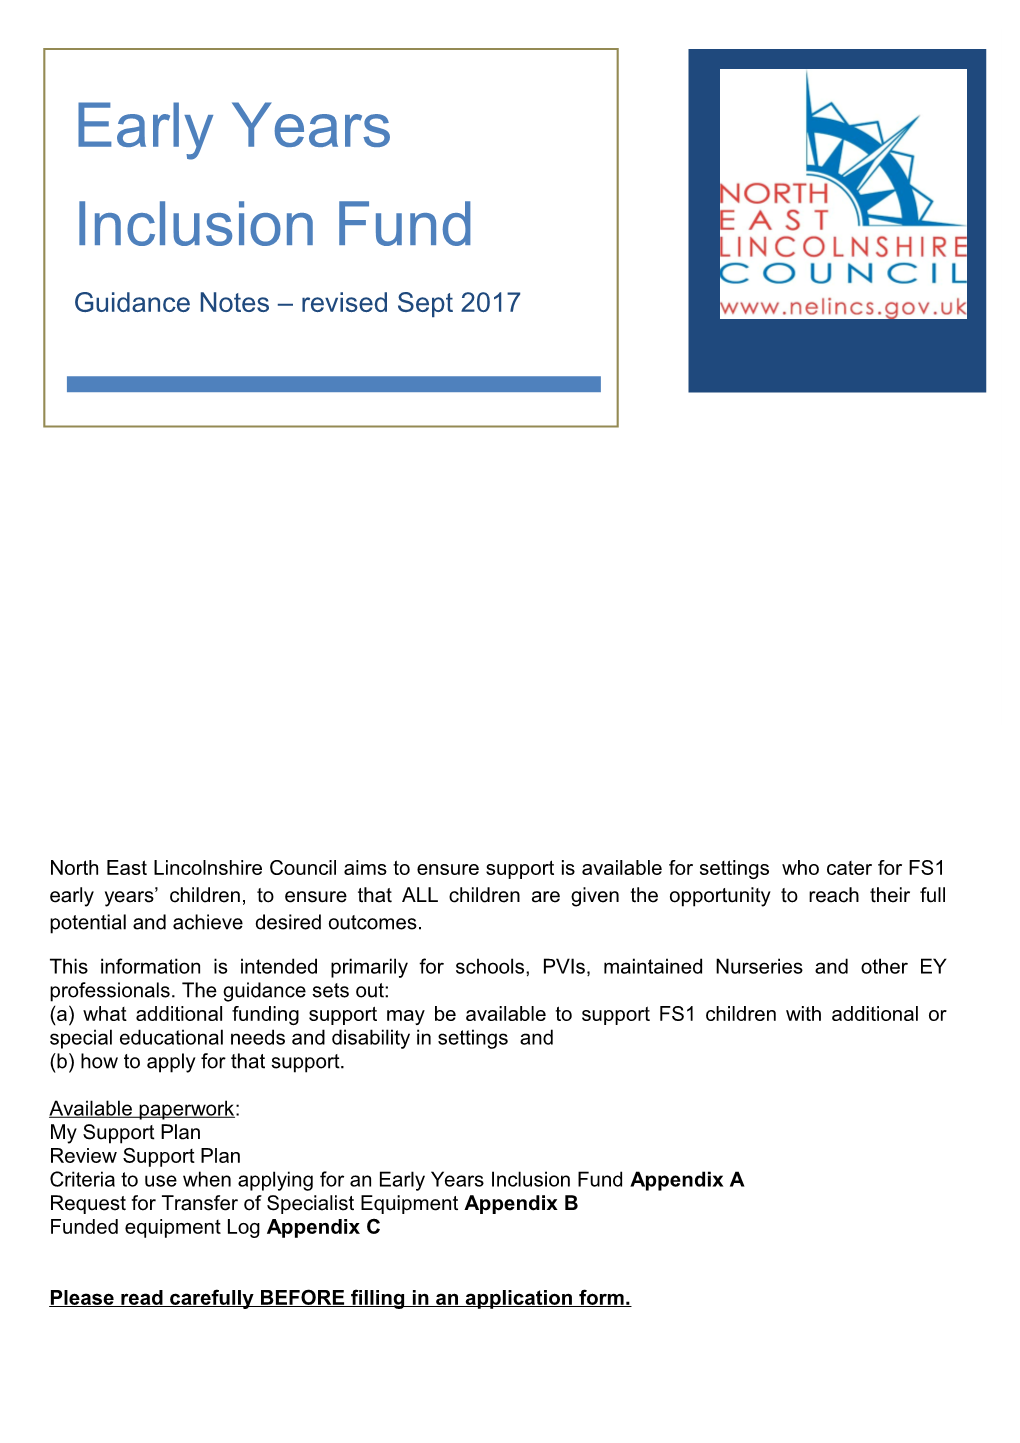 Early Years Inclusion Fund